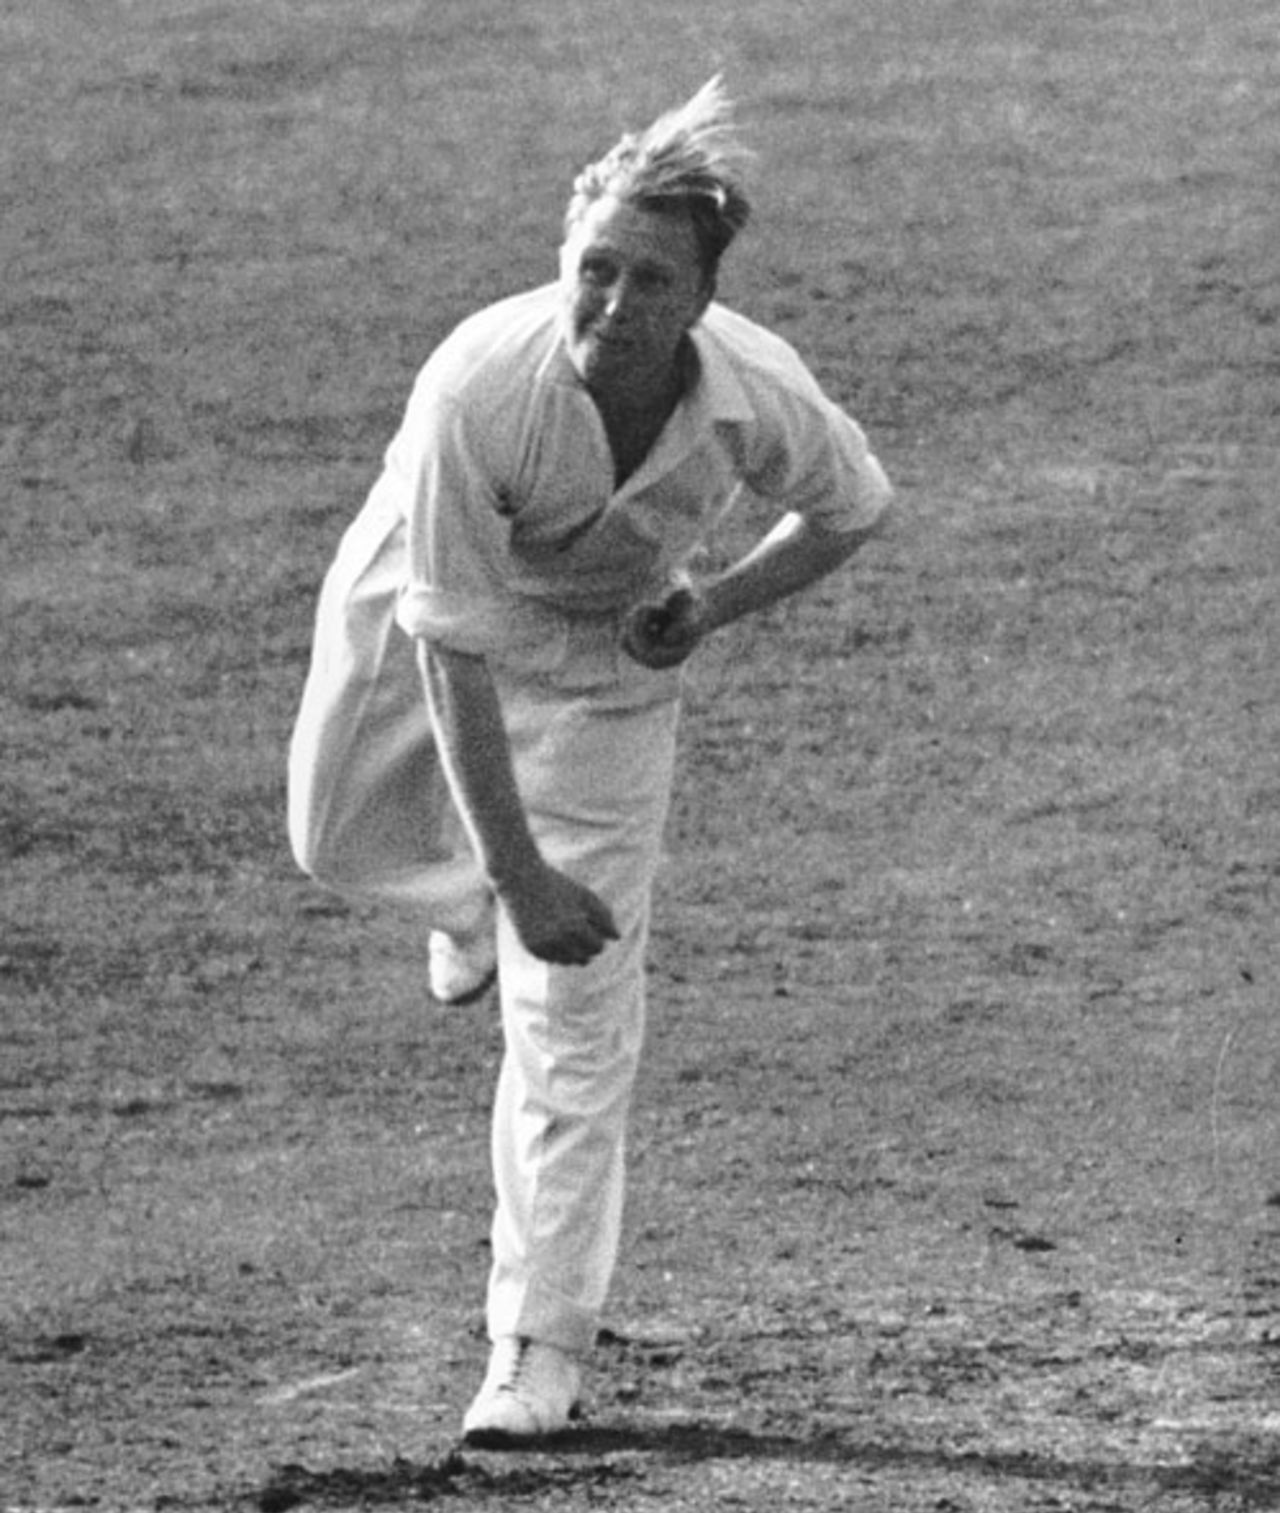 Eric Hollies bowls, England v Australia, 5th Test, The Oval, 2nd day, August 16, 1948